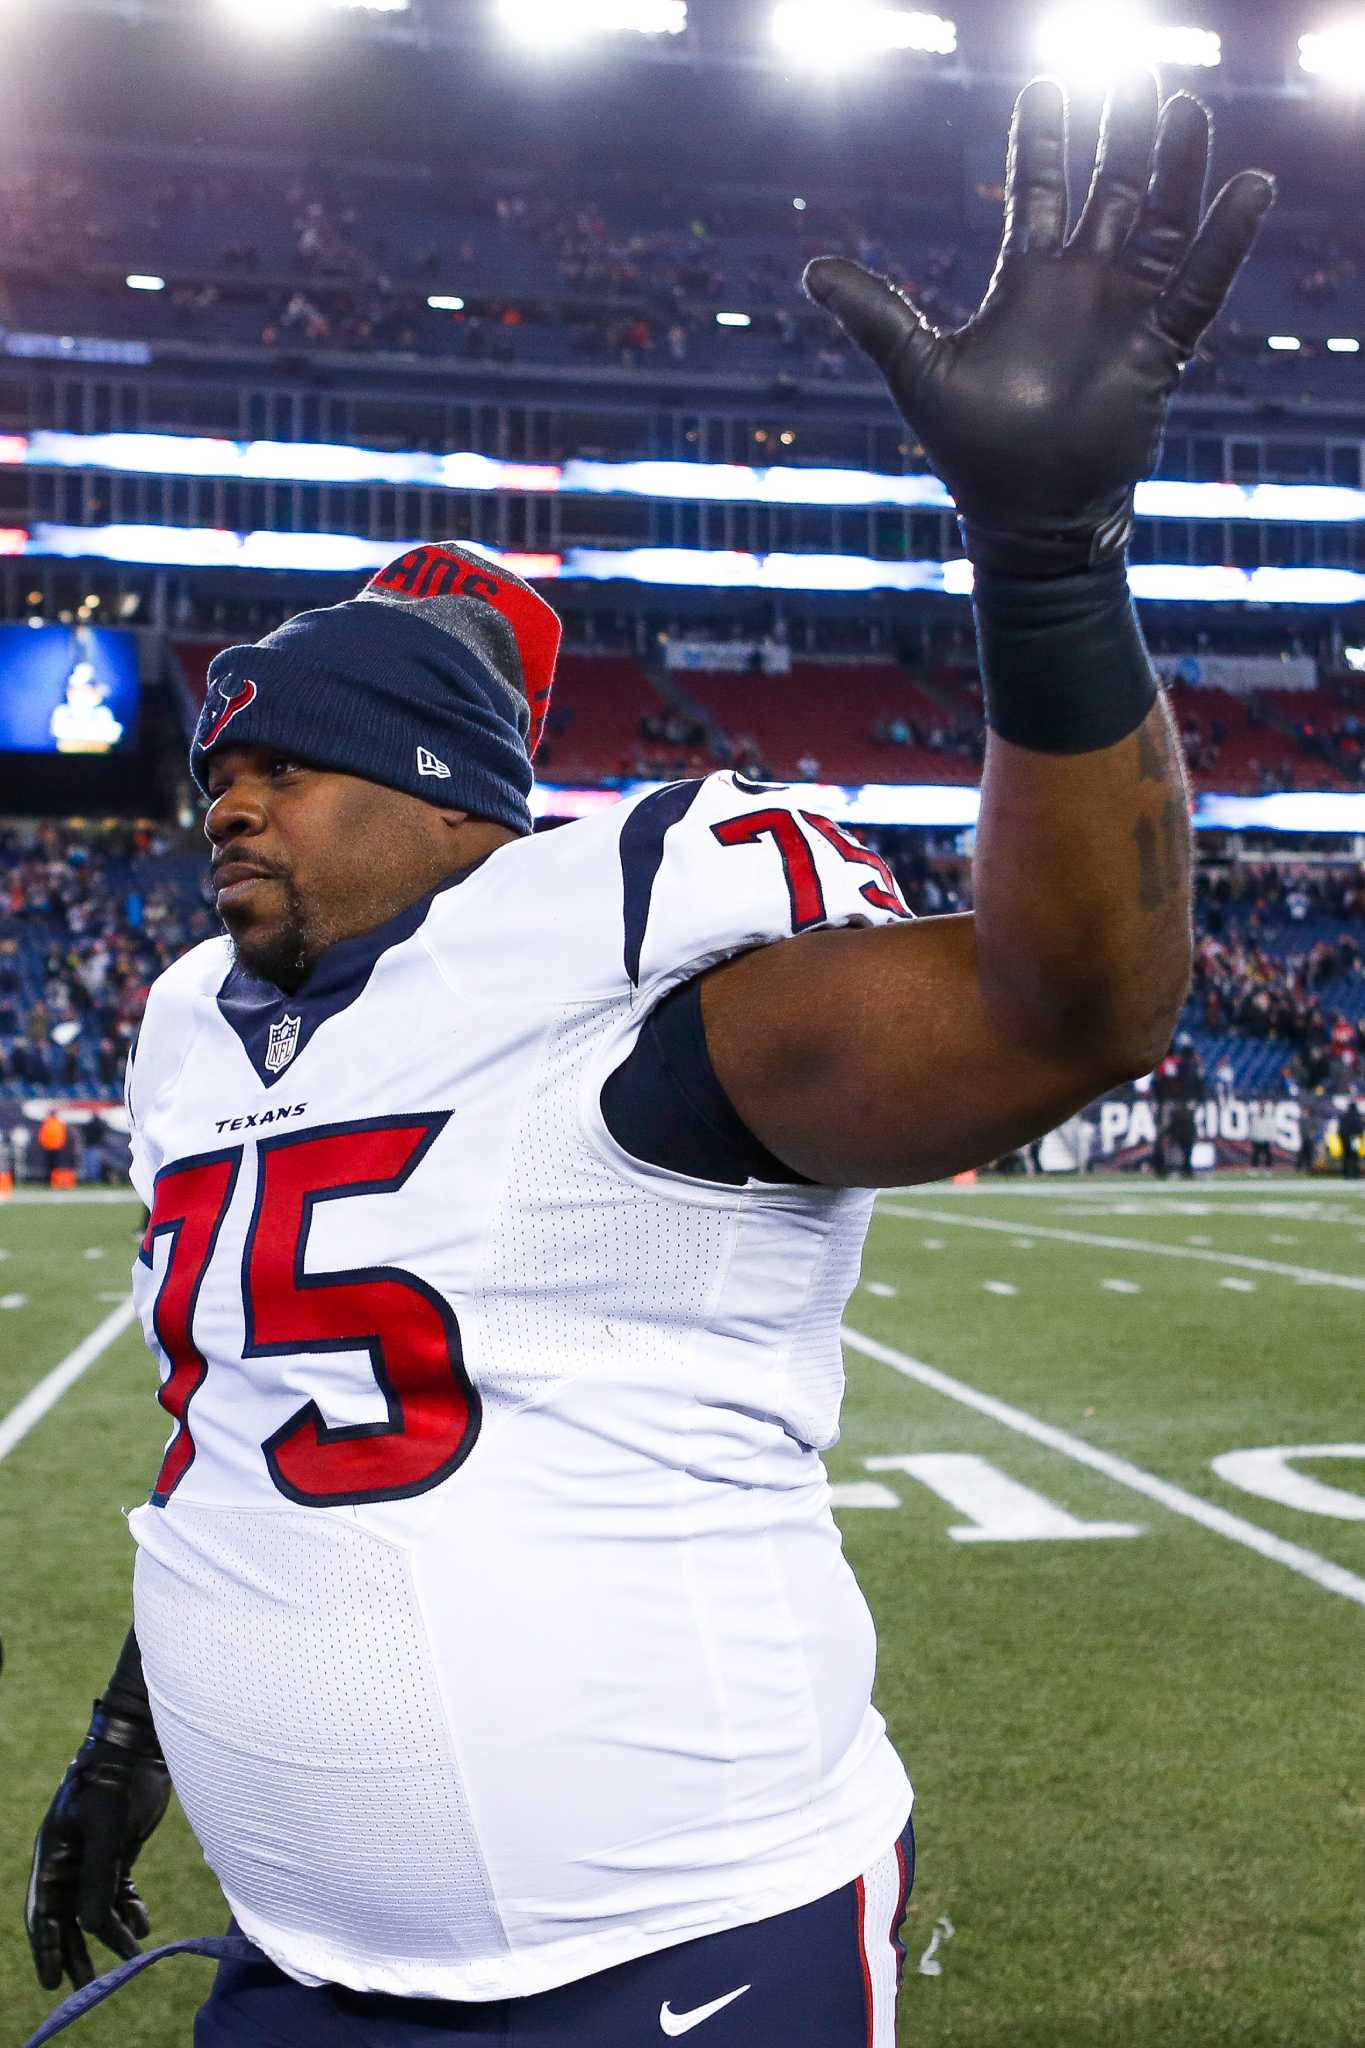 Texans' Vince Wilfork likely to retire